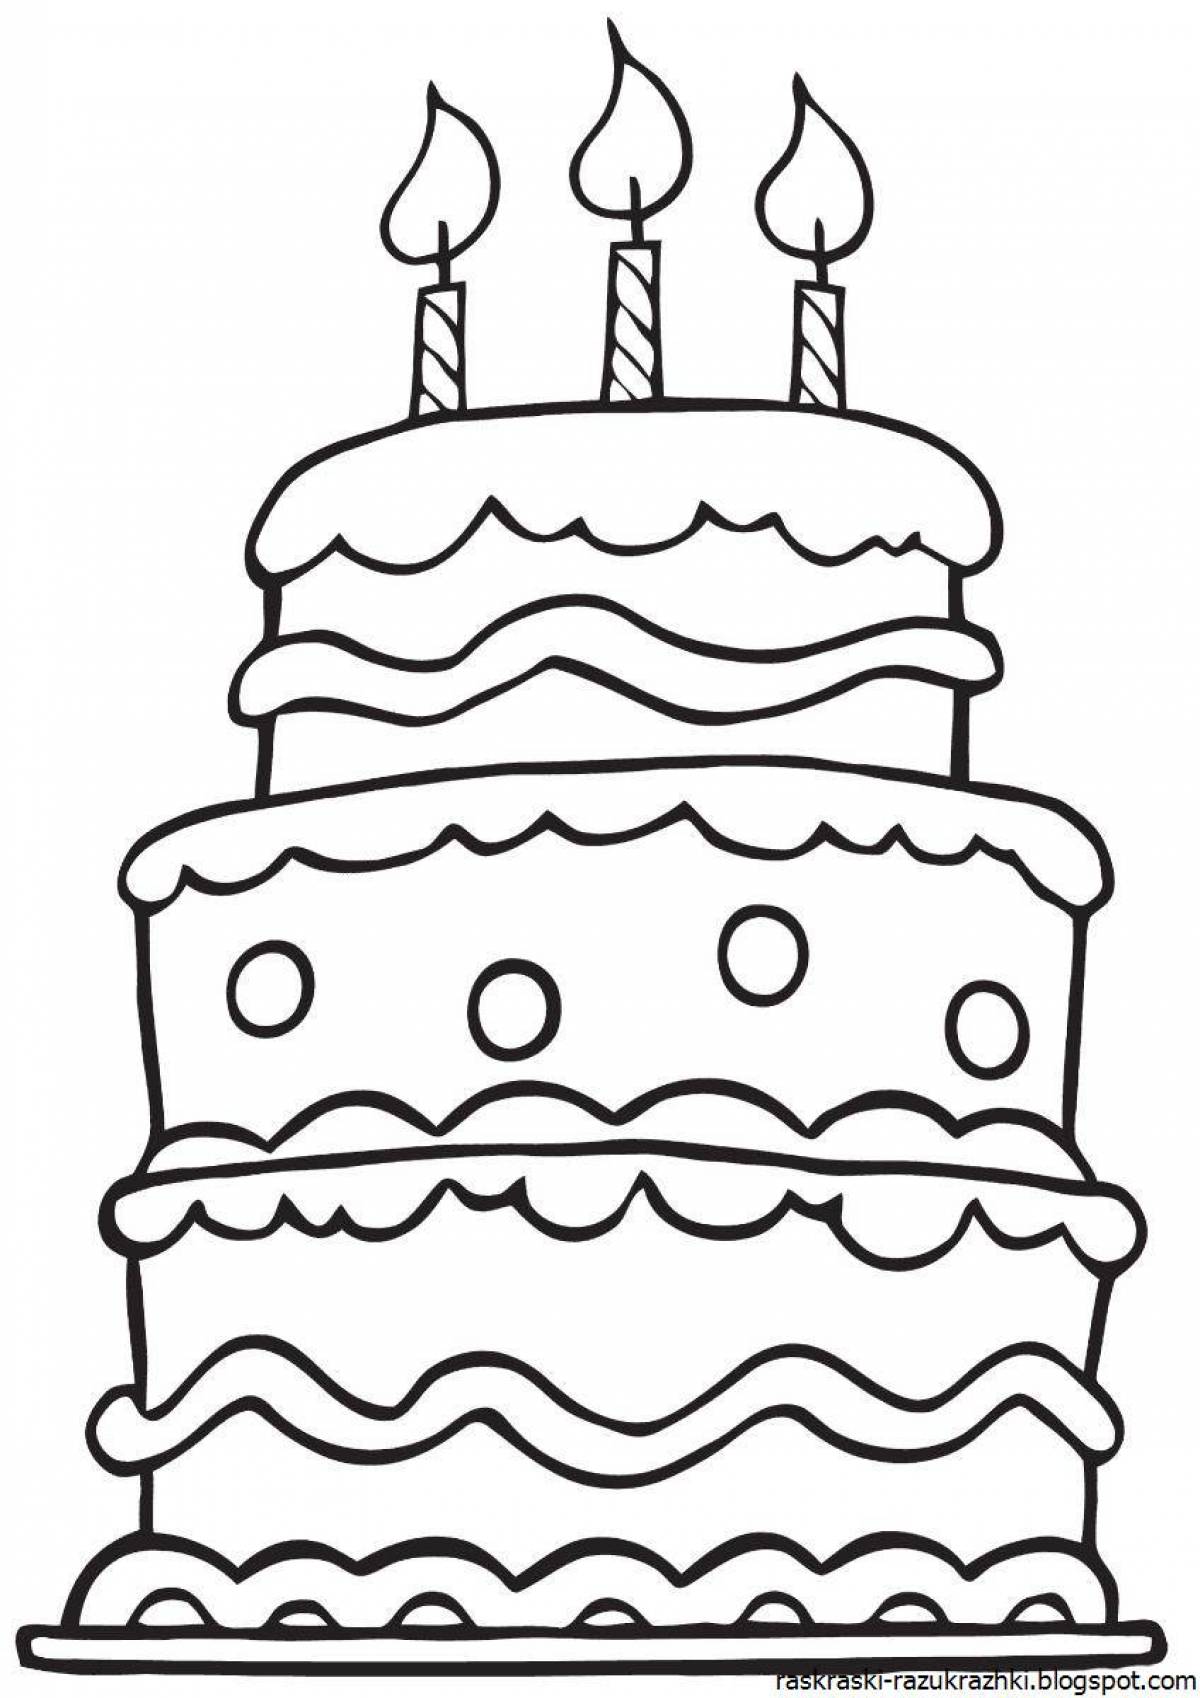 Colorful cakes coloring book for kids